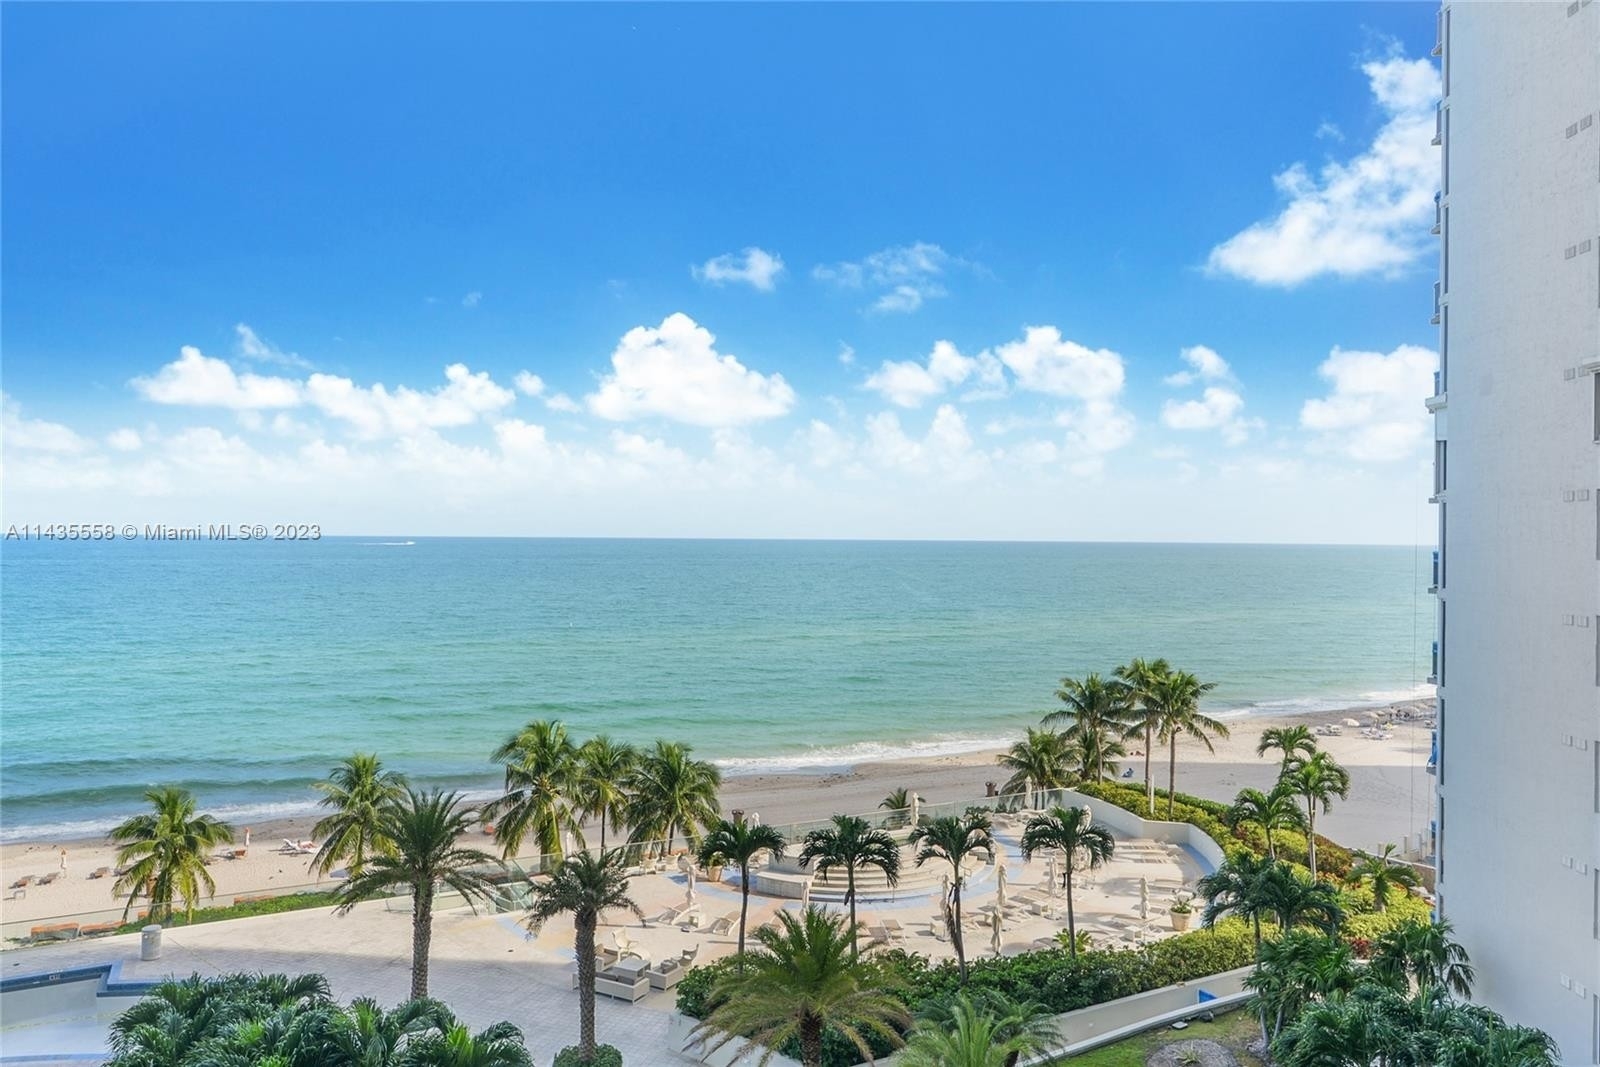 2. Condominiums for Sale at 19111 Collins Ave, 605 North Biscayne Beach, Sunny Isles Beach, FL 33160